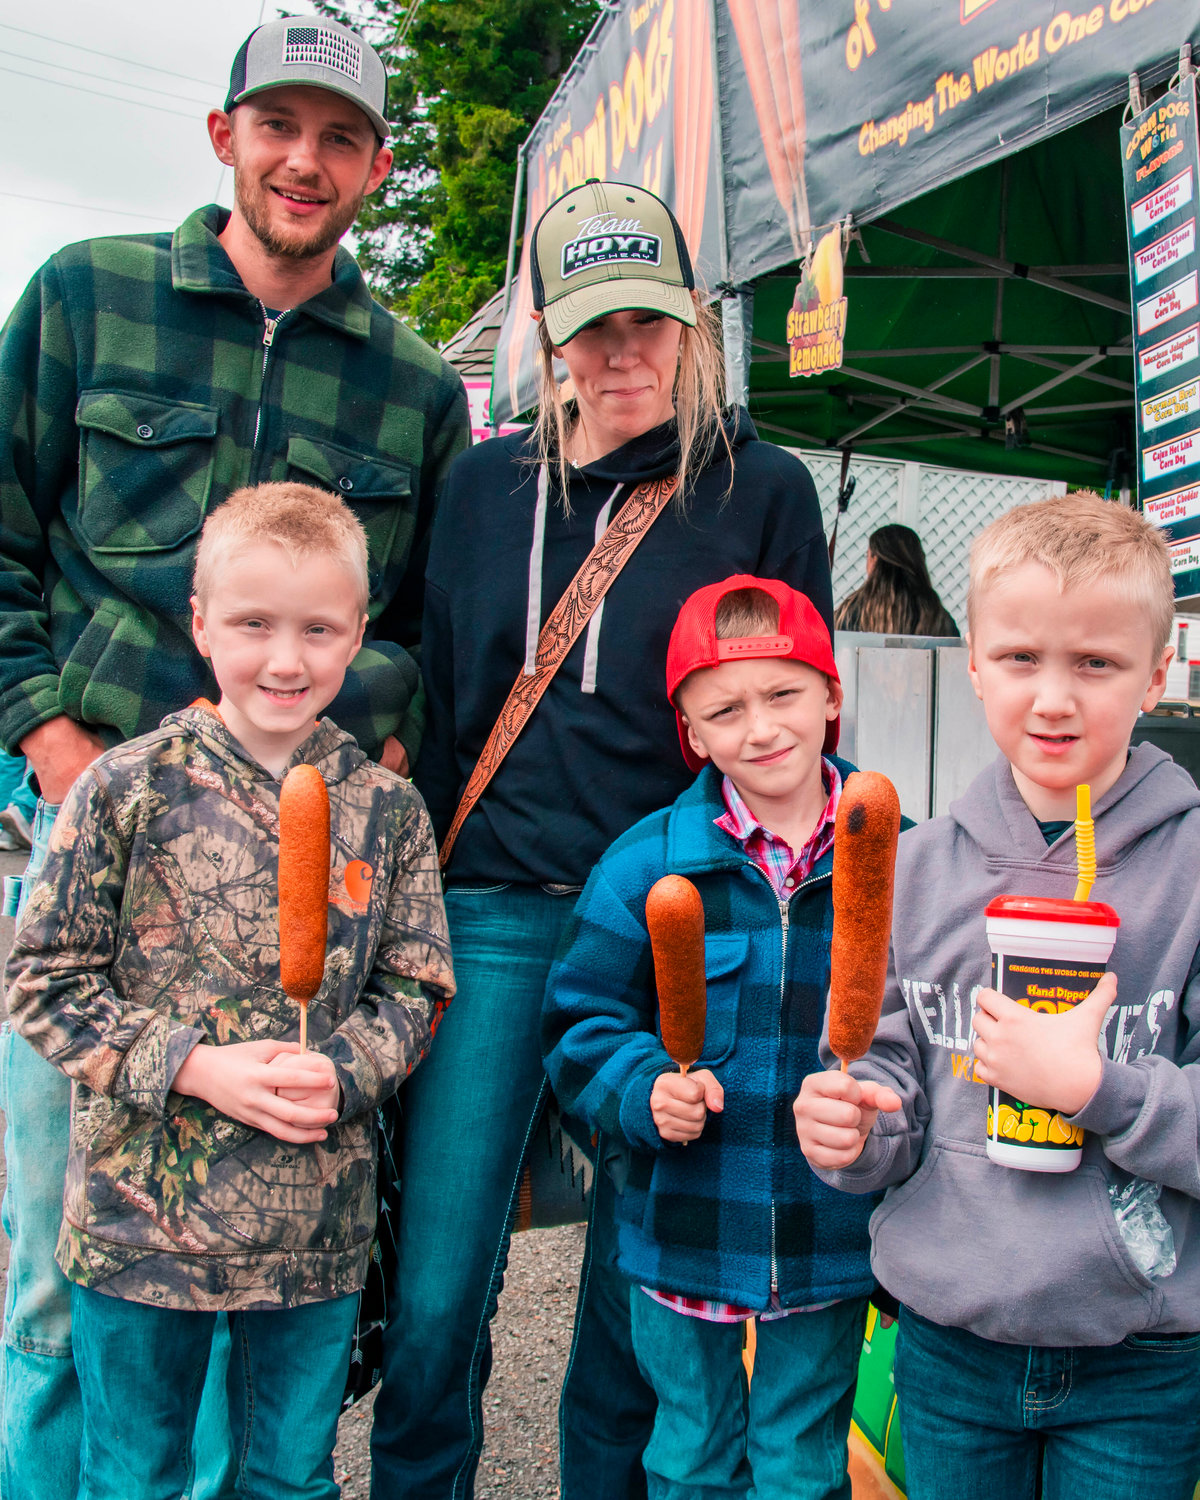 Members of the Southworth Family hold up corn dogs during their first visit to the Packwood Flea Market Friday morning.